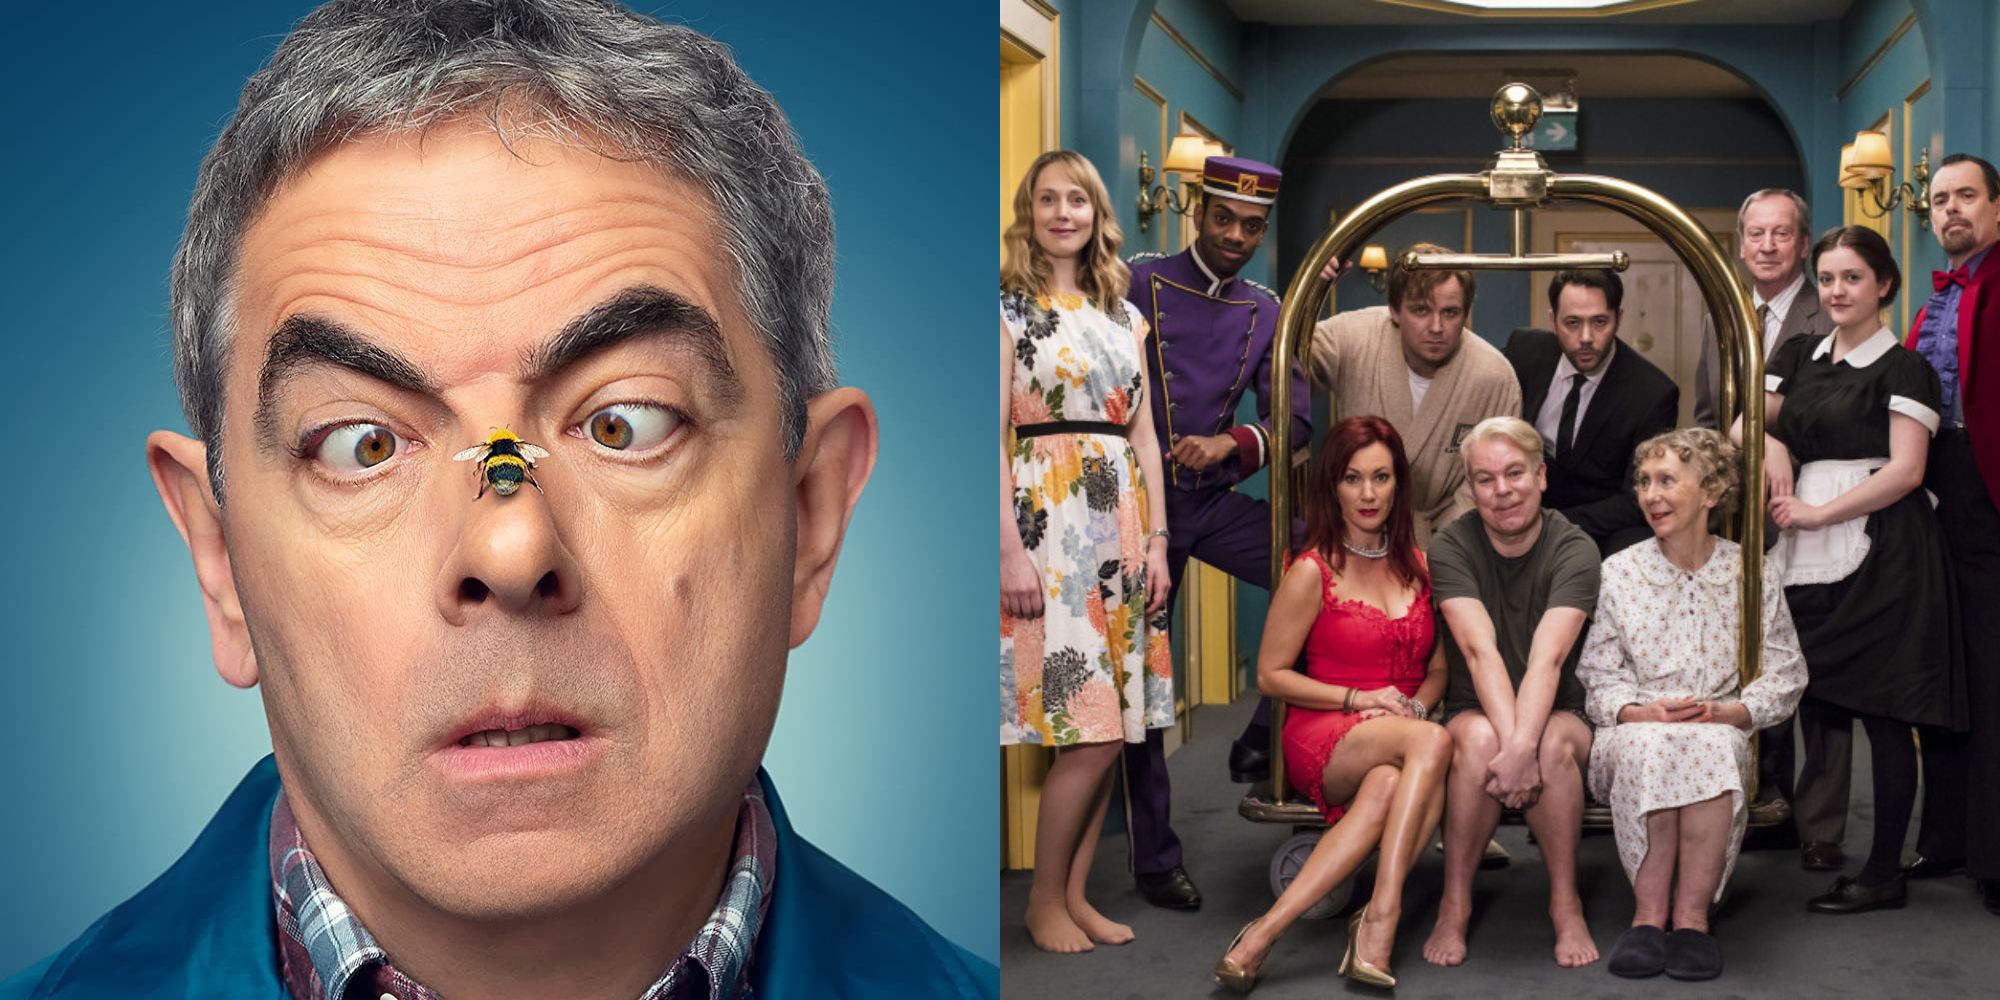 Split image showing Rowan Atkinson in Man Vs. Bee and the cast of Inside No. 9.